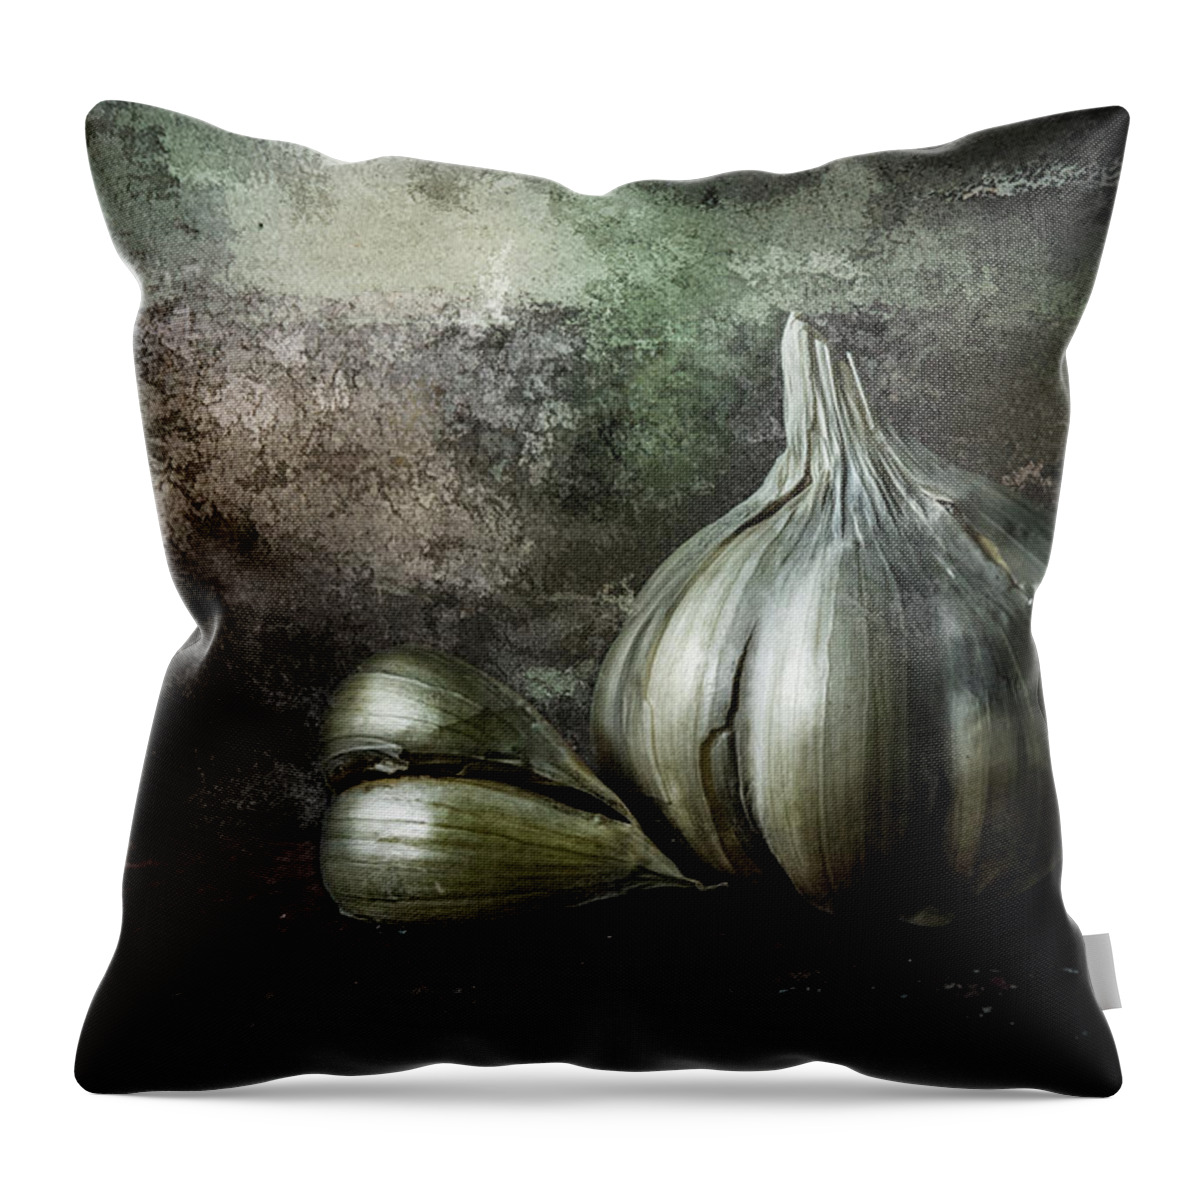 Garlic Throw Pillow featuring the photograph Garlic 4 by Michael Arend